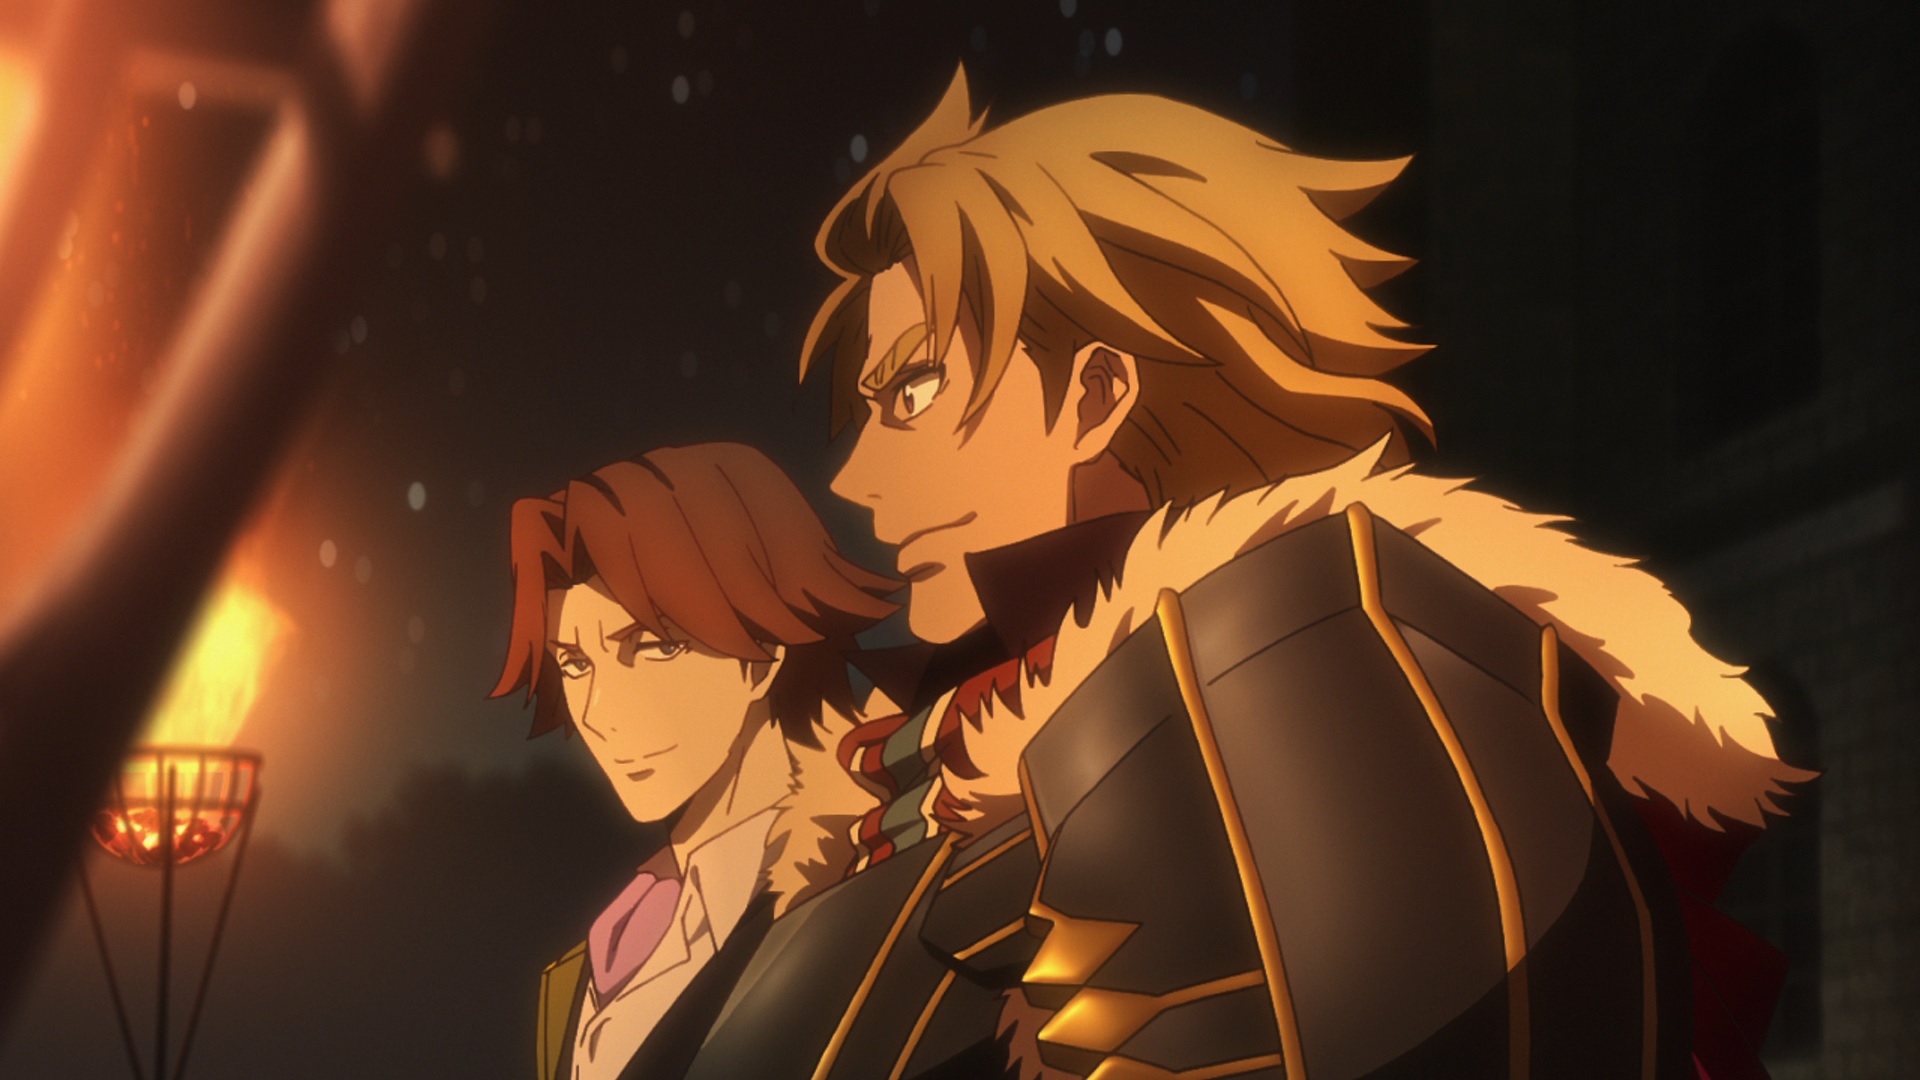 A Record of Grancrest War Ep 23 - David and Goliath - I drink and watch  anime